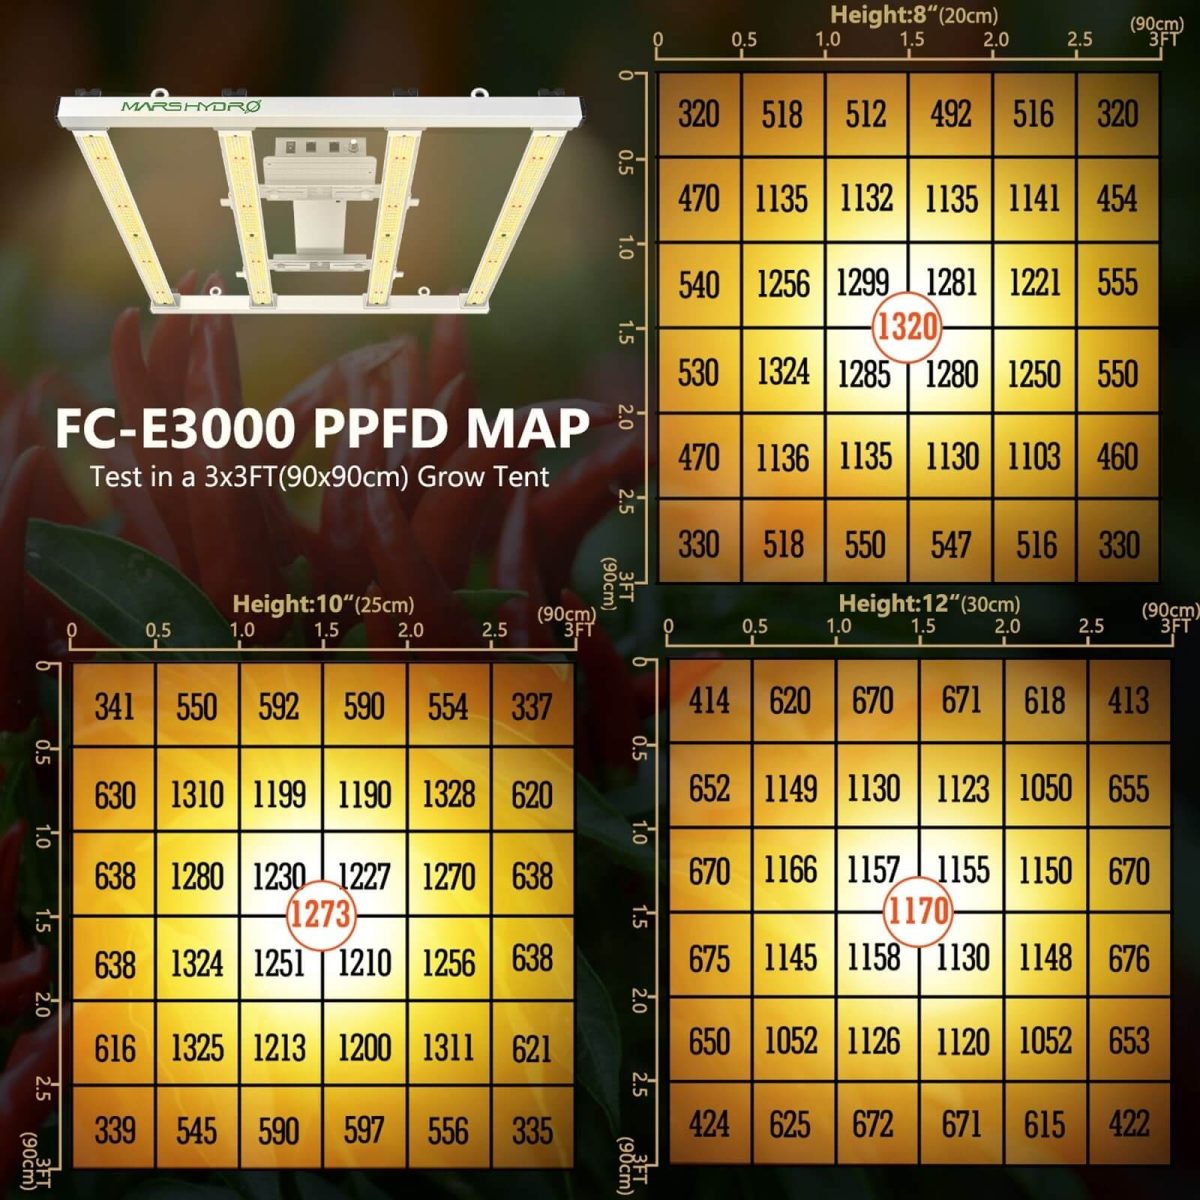 Three PPFD maps of the FC-E3000 LED grow light tested in a 3'x3' grow tent at 8,10,12 inches.